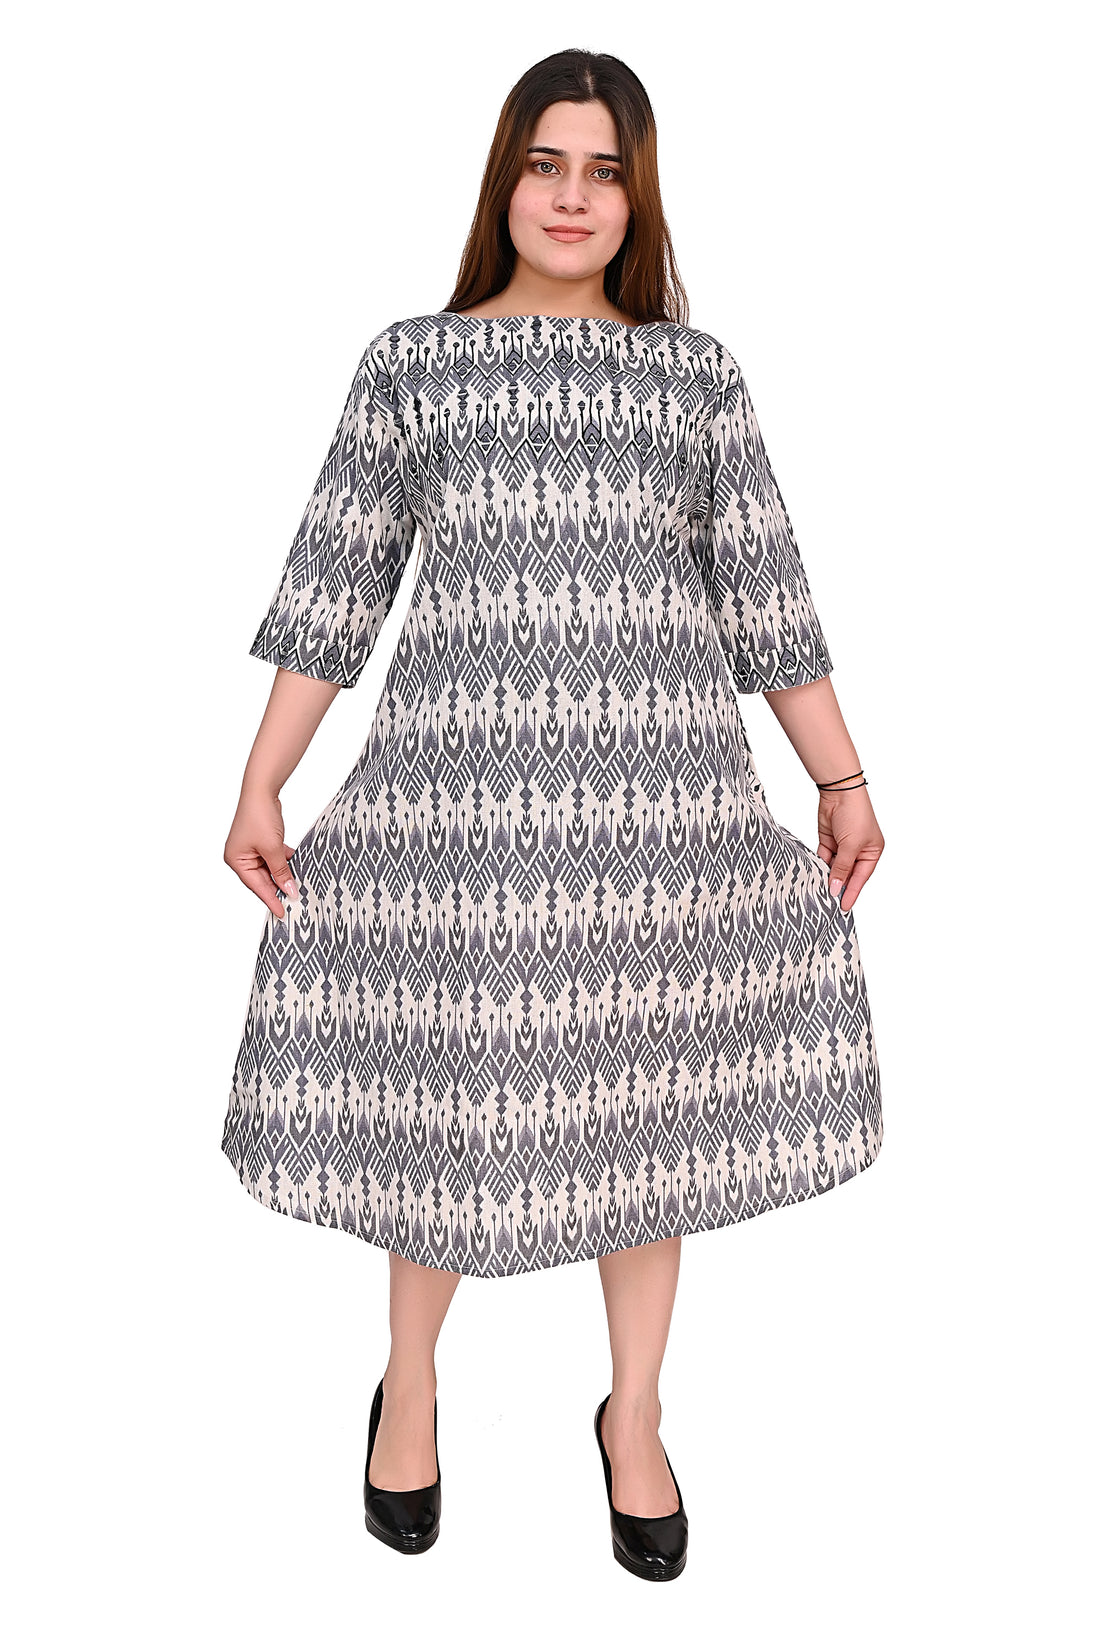 Nirmal online Premium quality digital printed and mirror embroidery Tunic Dress for Women in black & white